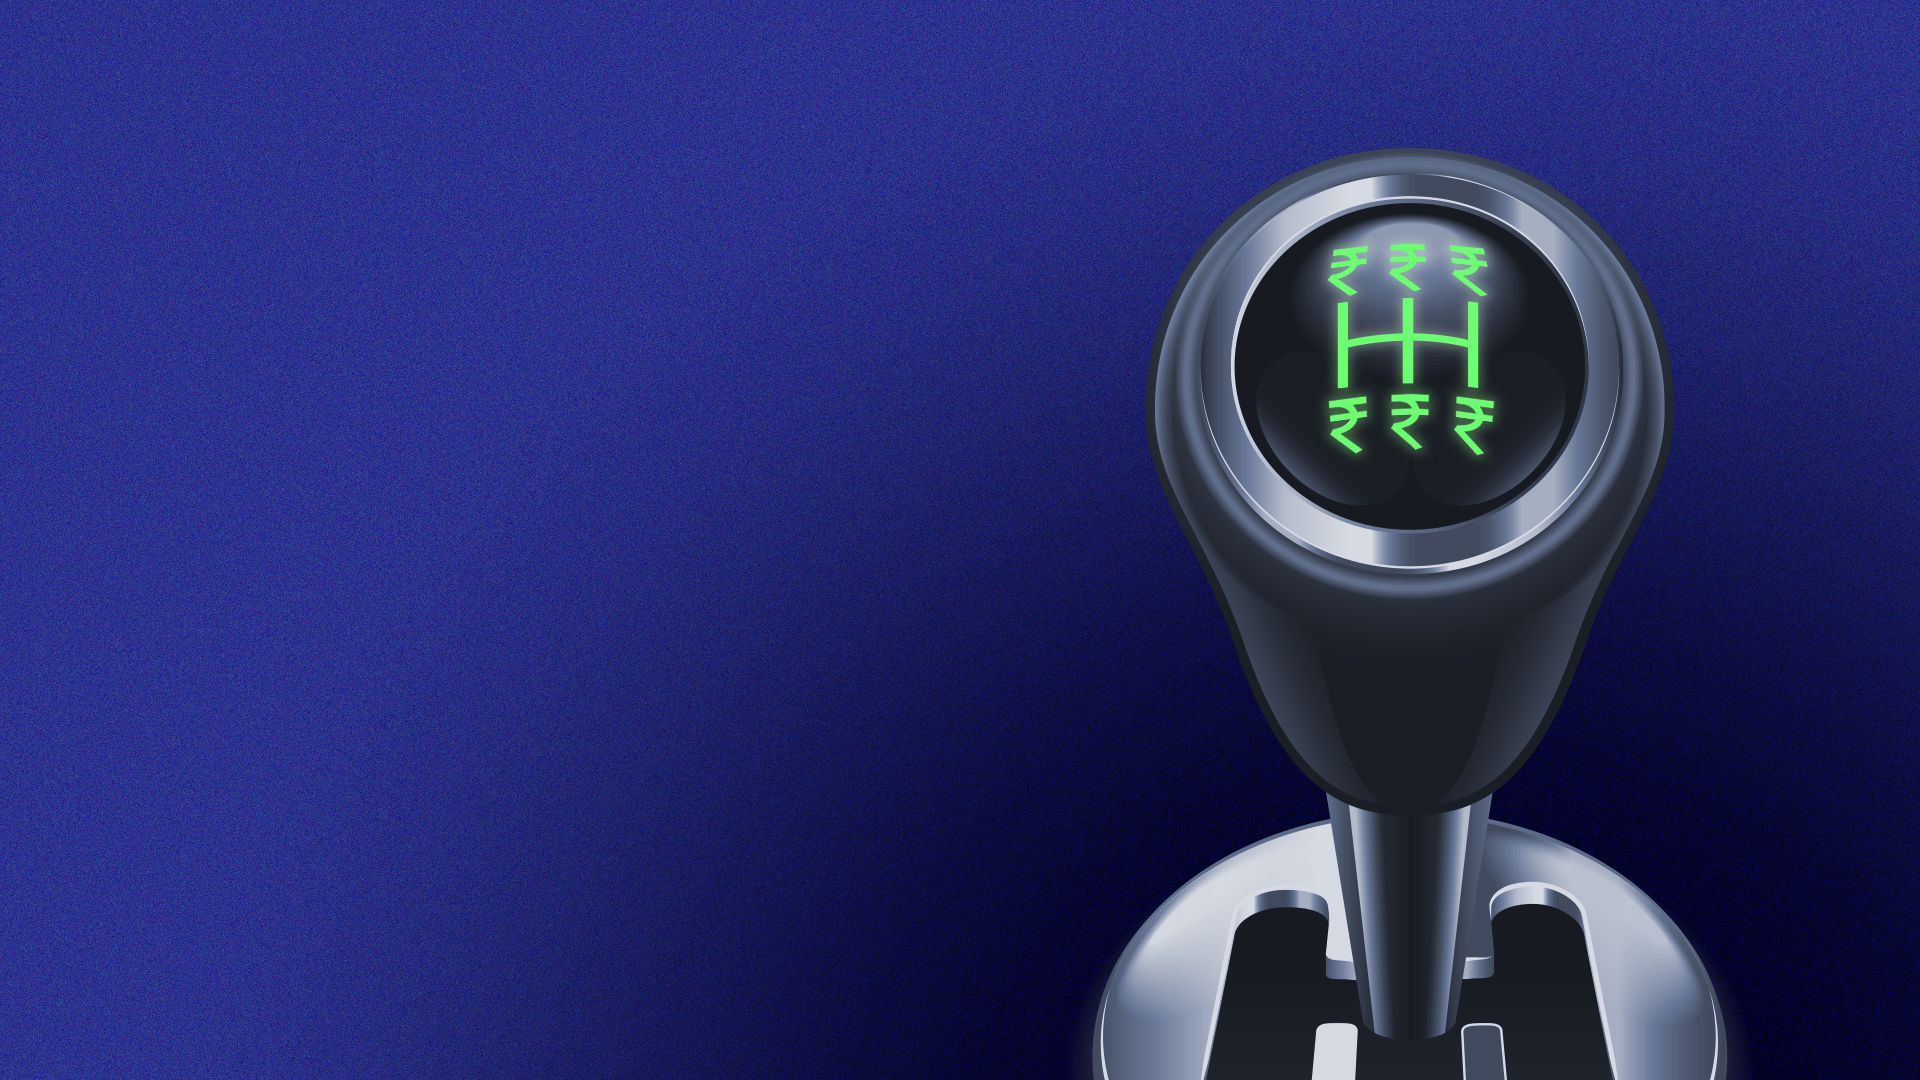 Illustration of a stick shift that has rupee symbols instead of gear numbers.